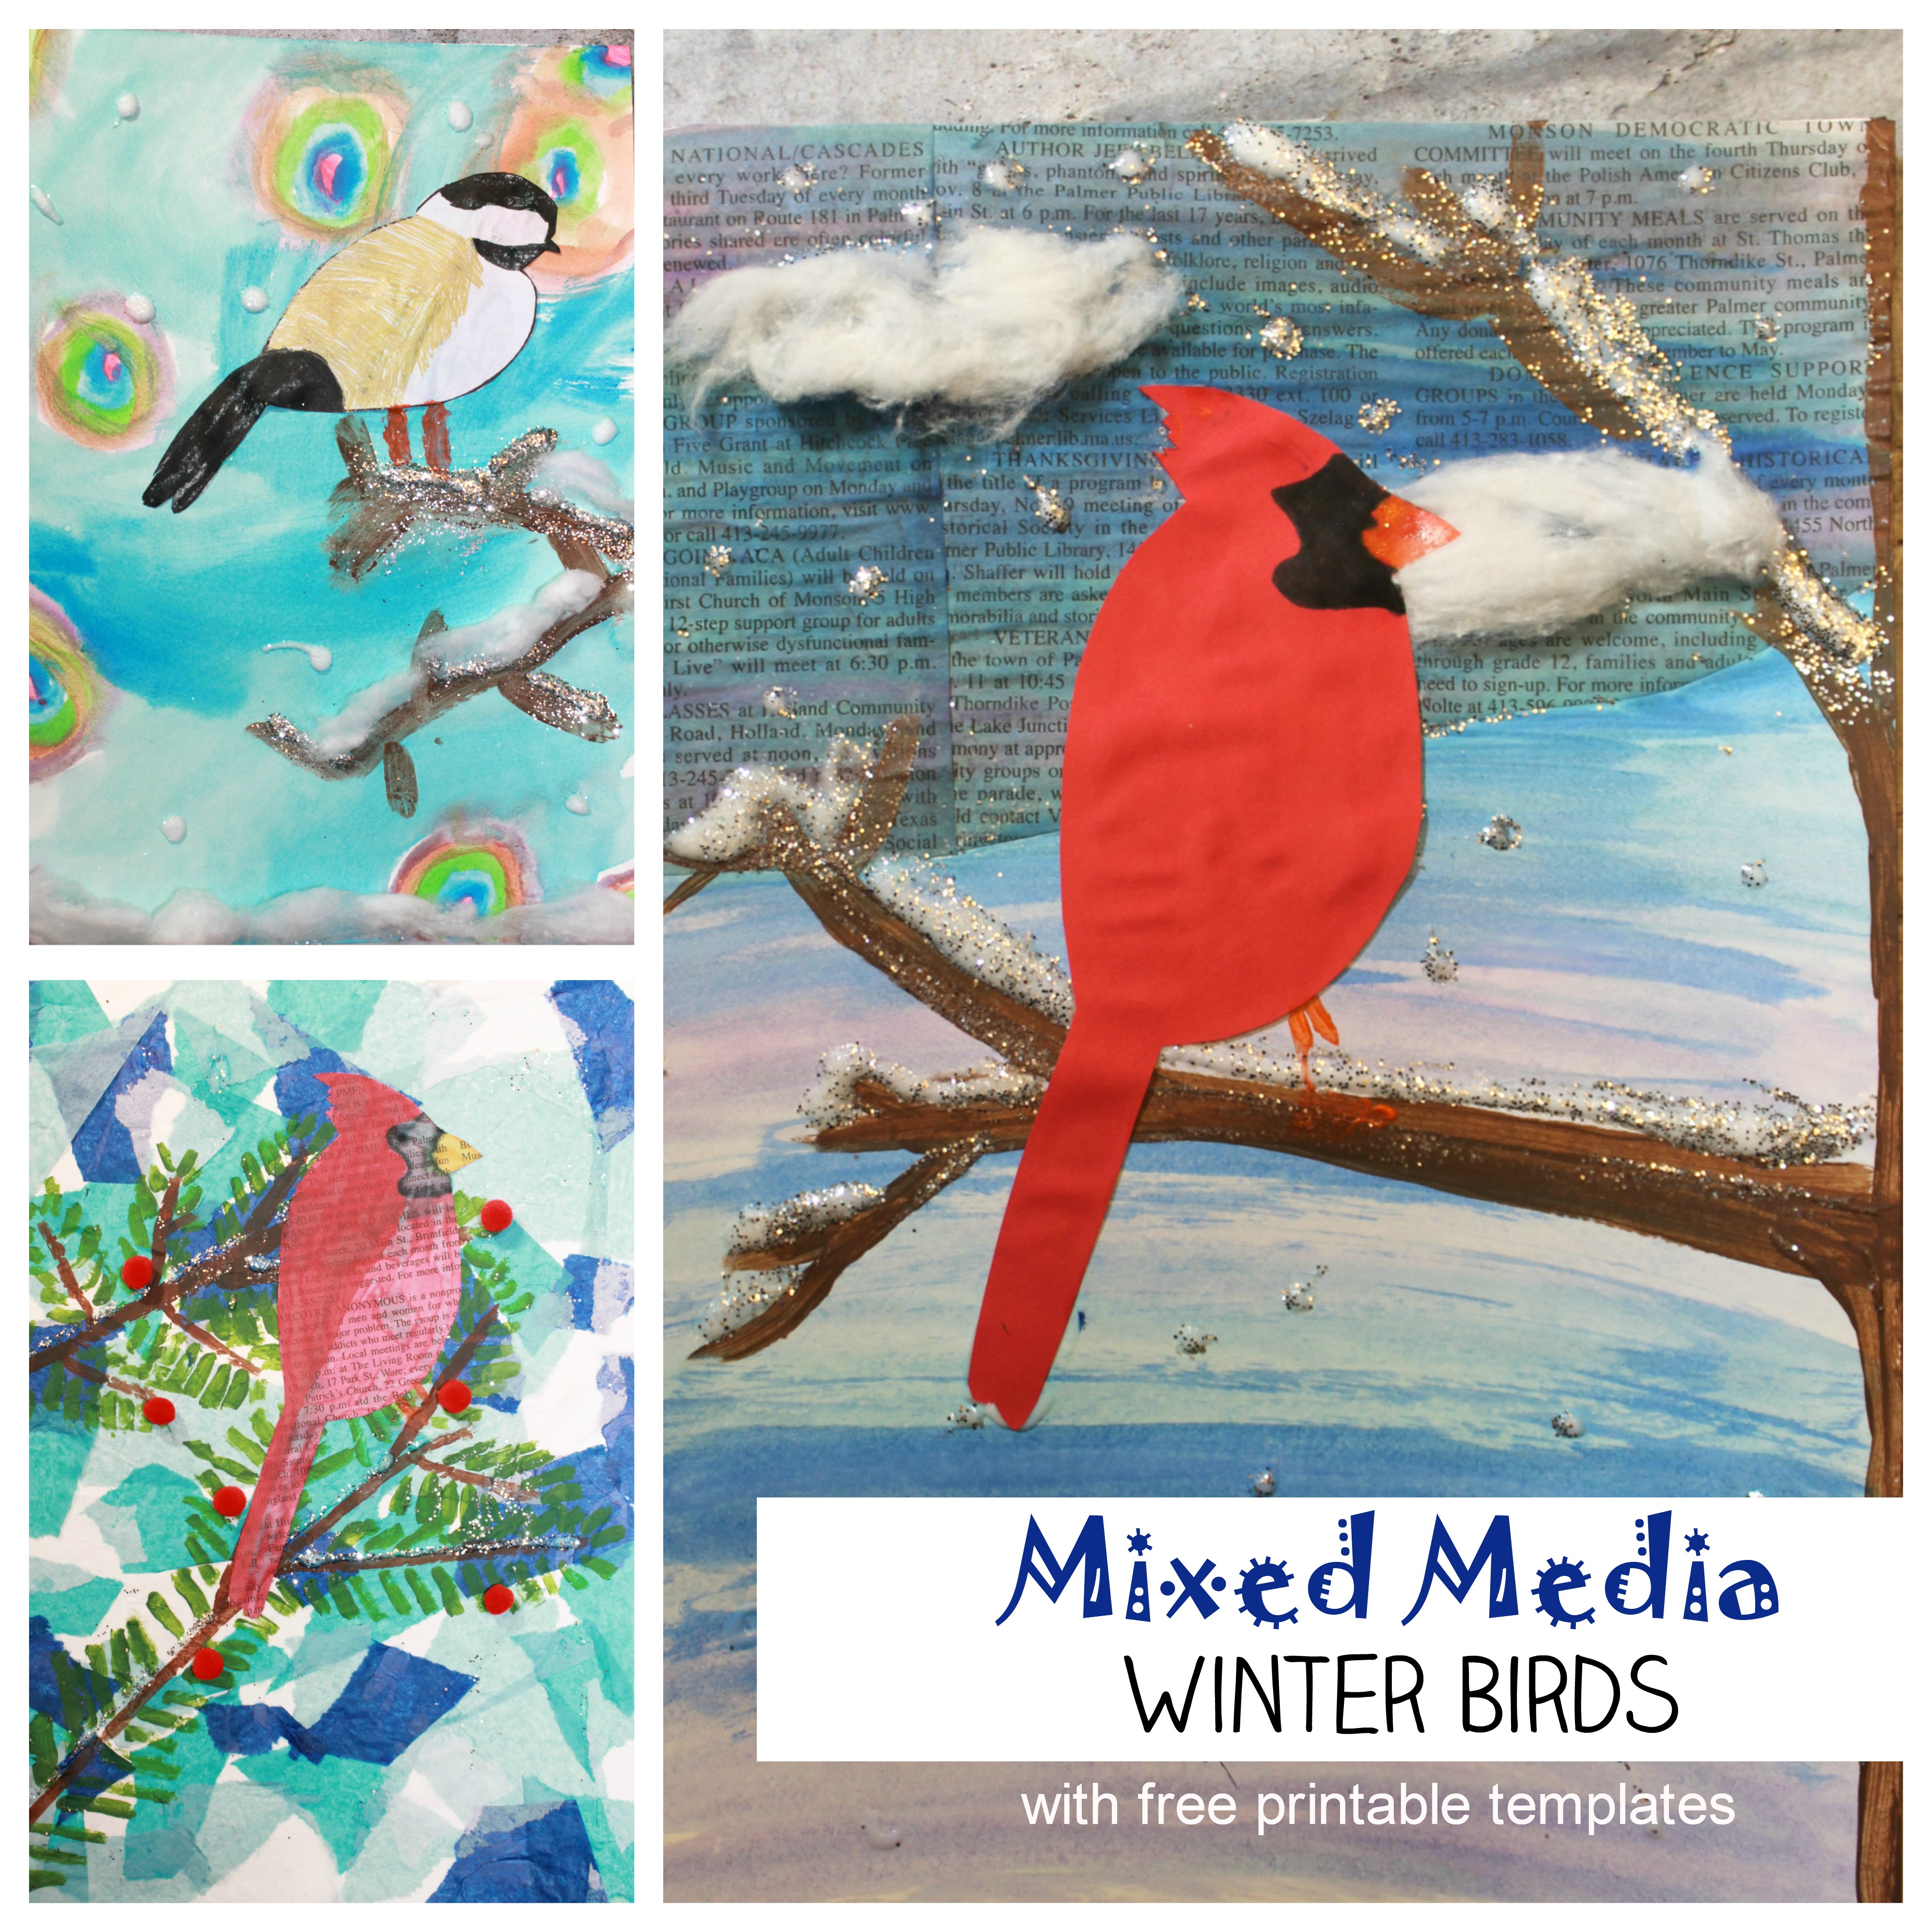 Mixed Media Winter Birds with free printable cardinal & chickadee templates. Beautiful winter art projects for kids